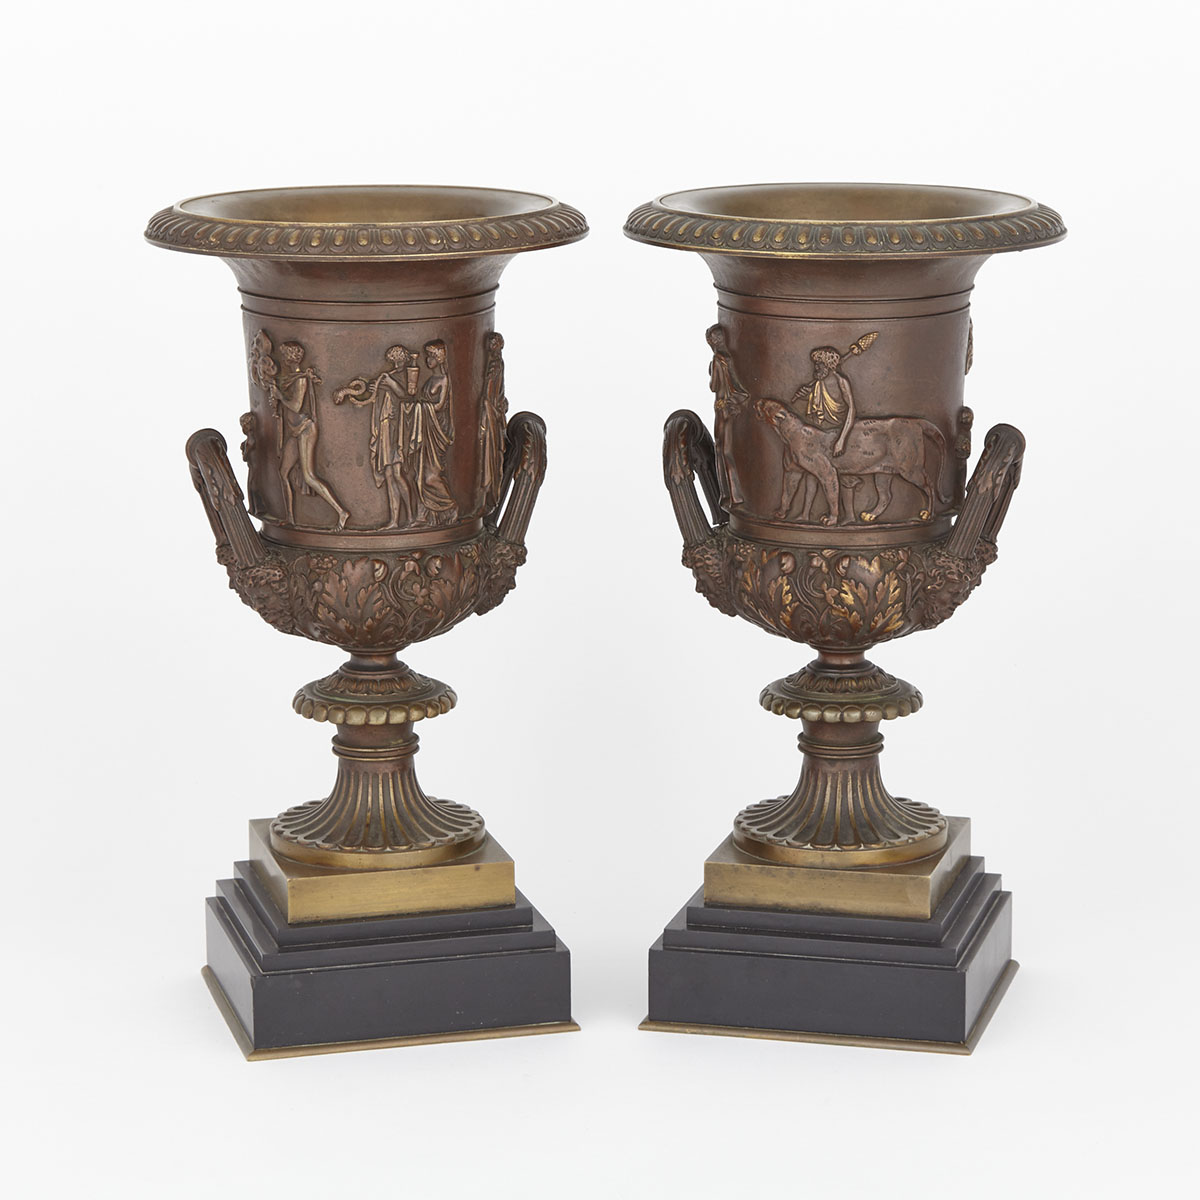 Large Pair of French Neoclassical Patinated and Parcel Gilt Bronze Urns, After the Antique, 19th century